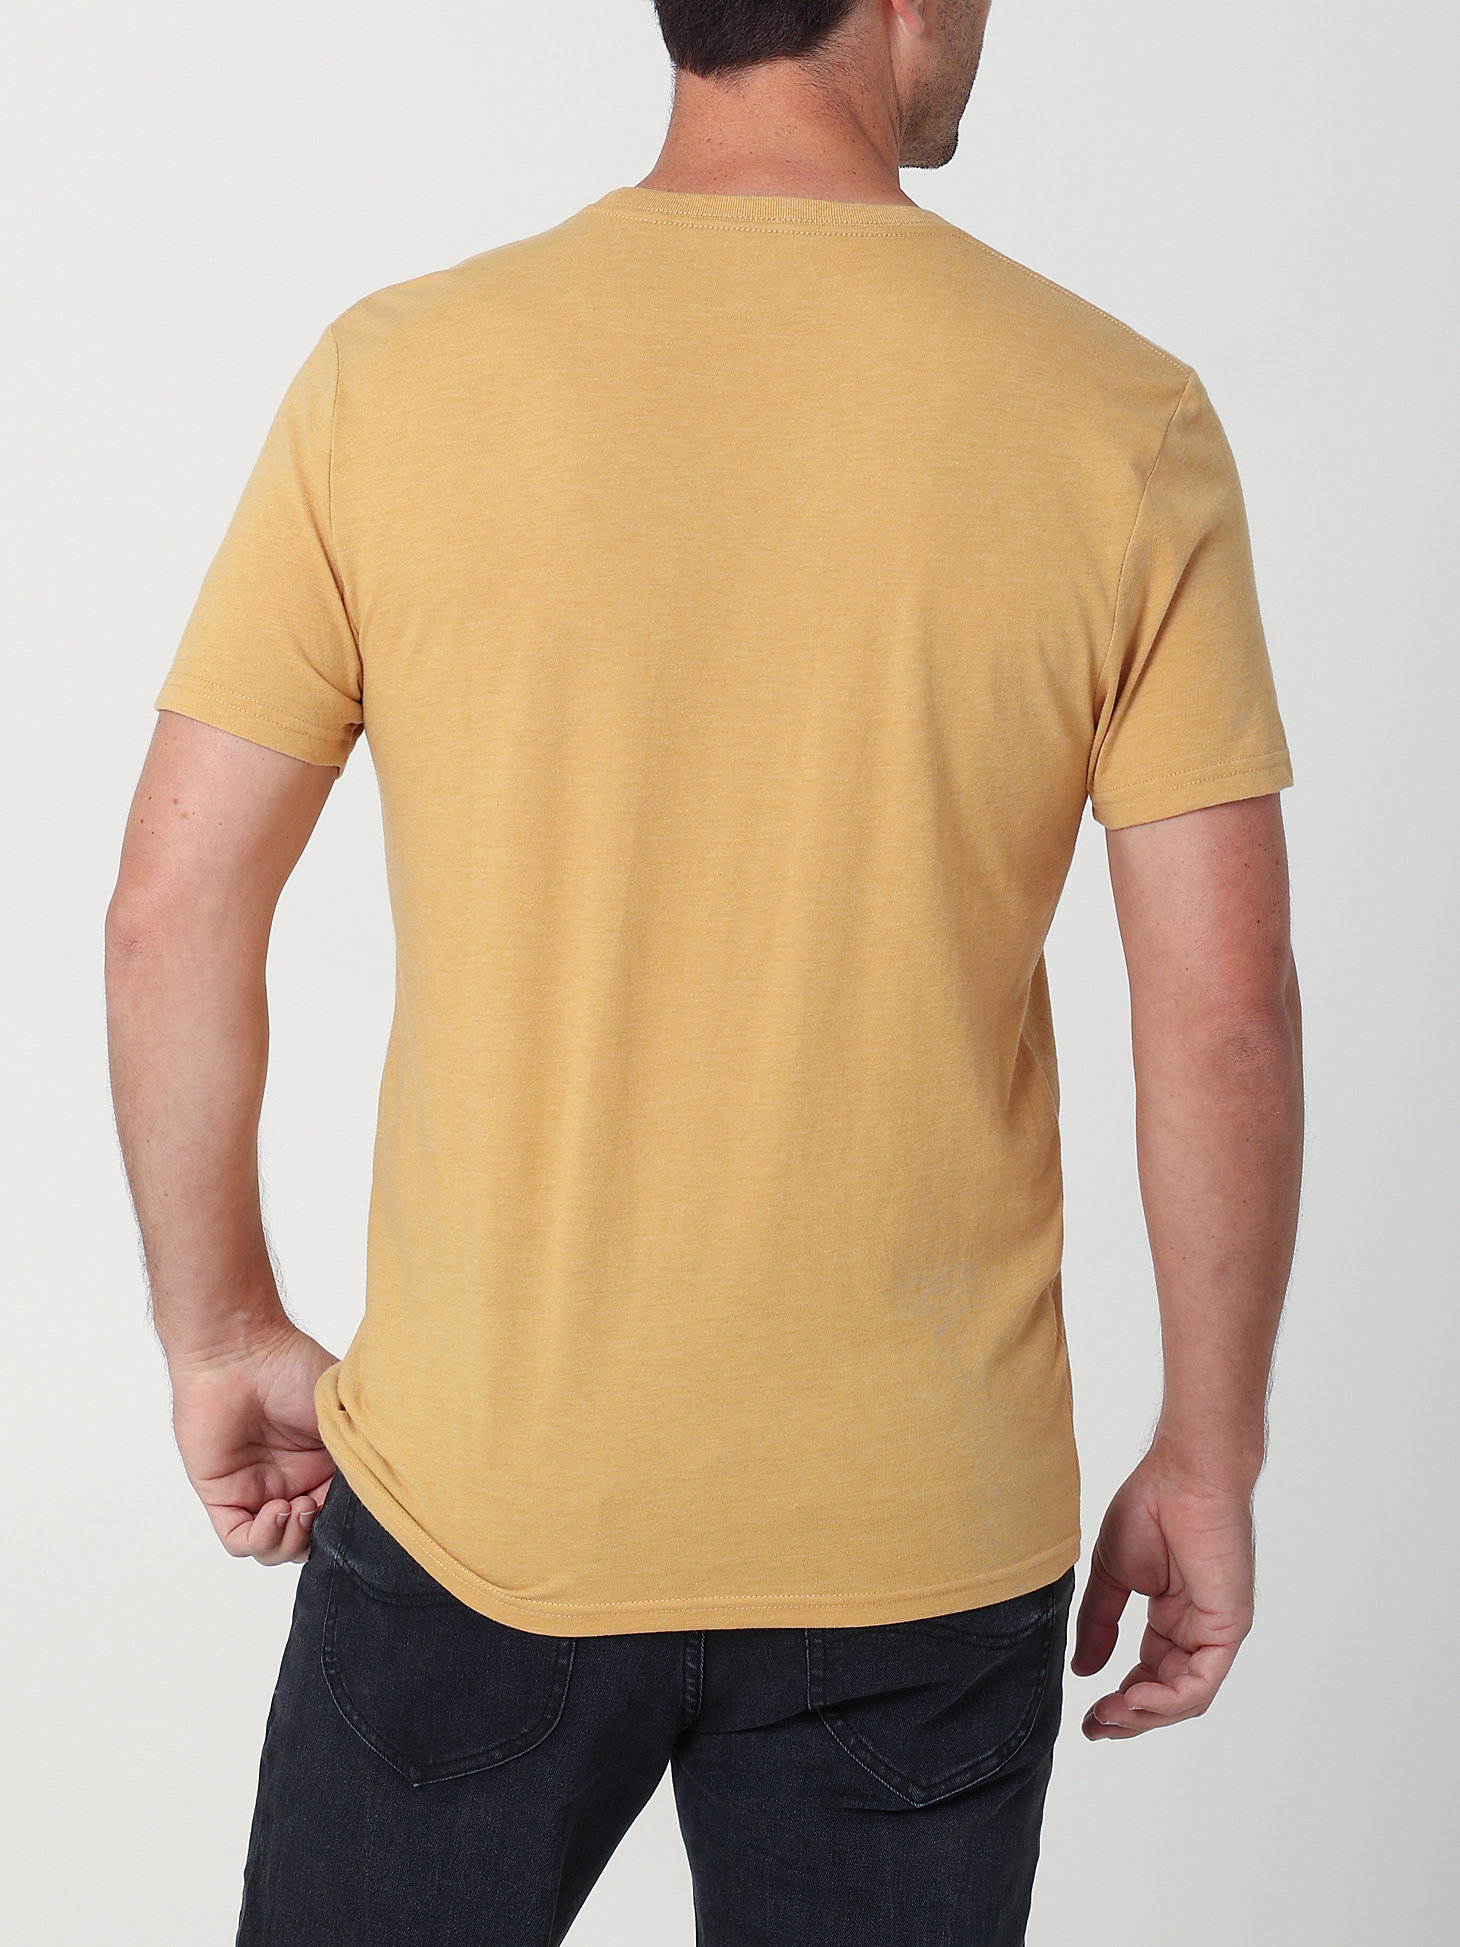 Men's Mad Marlin Graphic Tee in Pale Gold alternative view 1